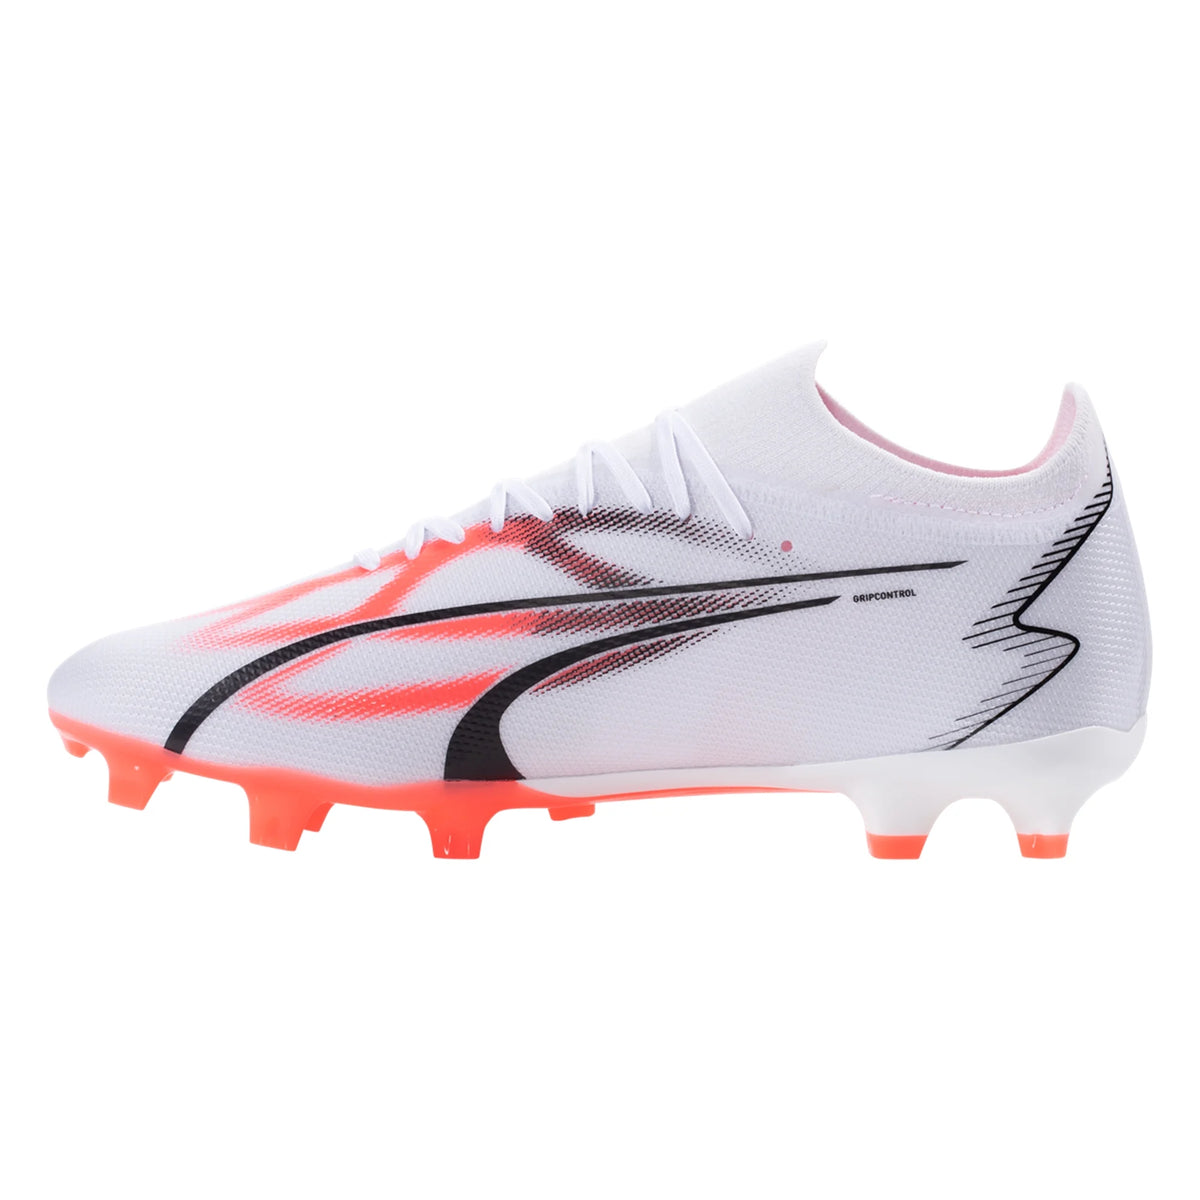 Puma Ultra Match Ground Cleat Soccer Zone USA - – White/Black/Fire FG/AG 107347-01 Orchid Soccer Firm